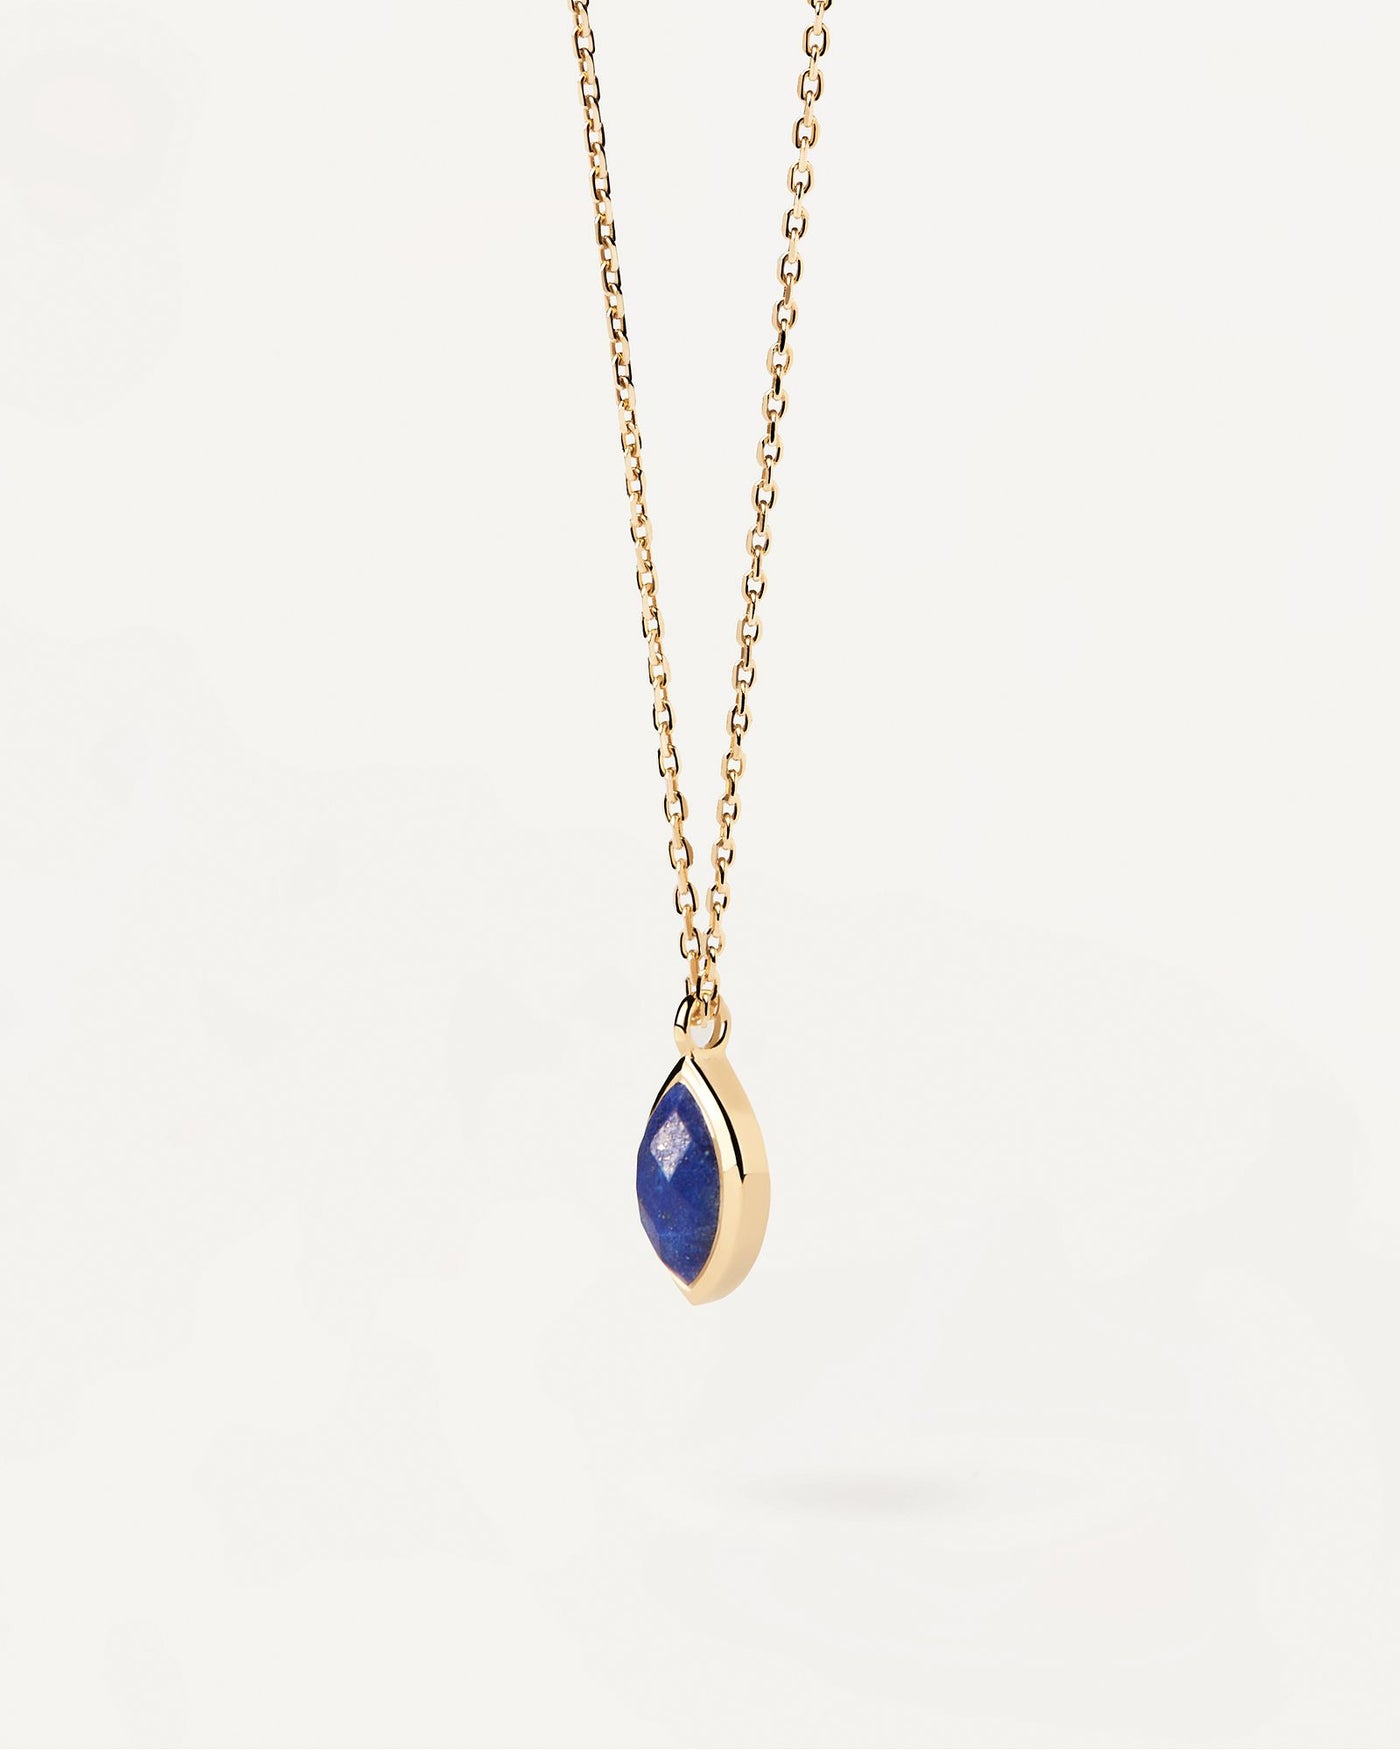 2024 Selection | Lapis Lazuli Nomad Necklace. Gold-plated chain necklace with marquise cut blue gemstone pendant. Get the latest arrival from PDPAOLA. Place your order safely and get this Best Seller. Free Shipping.